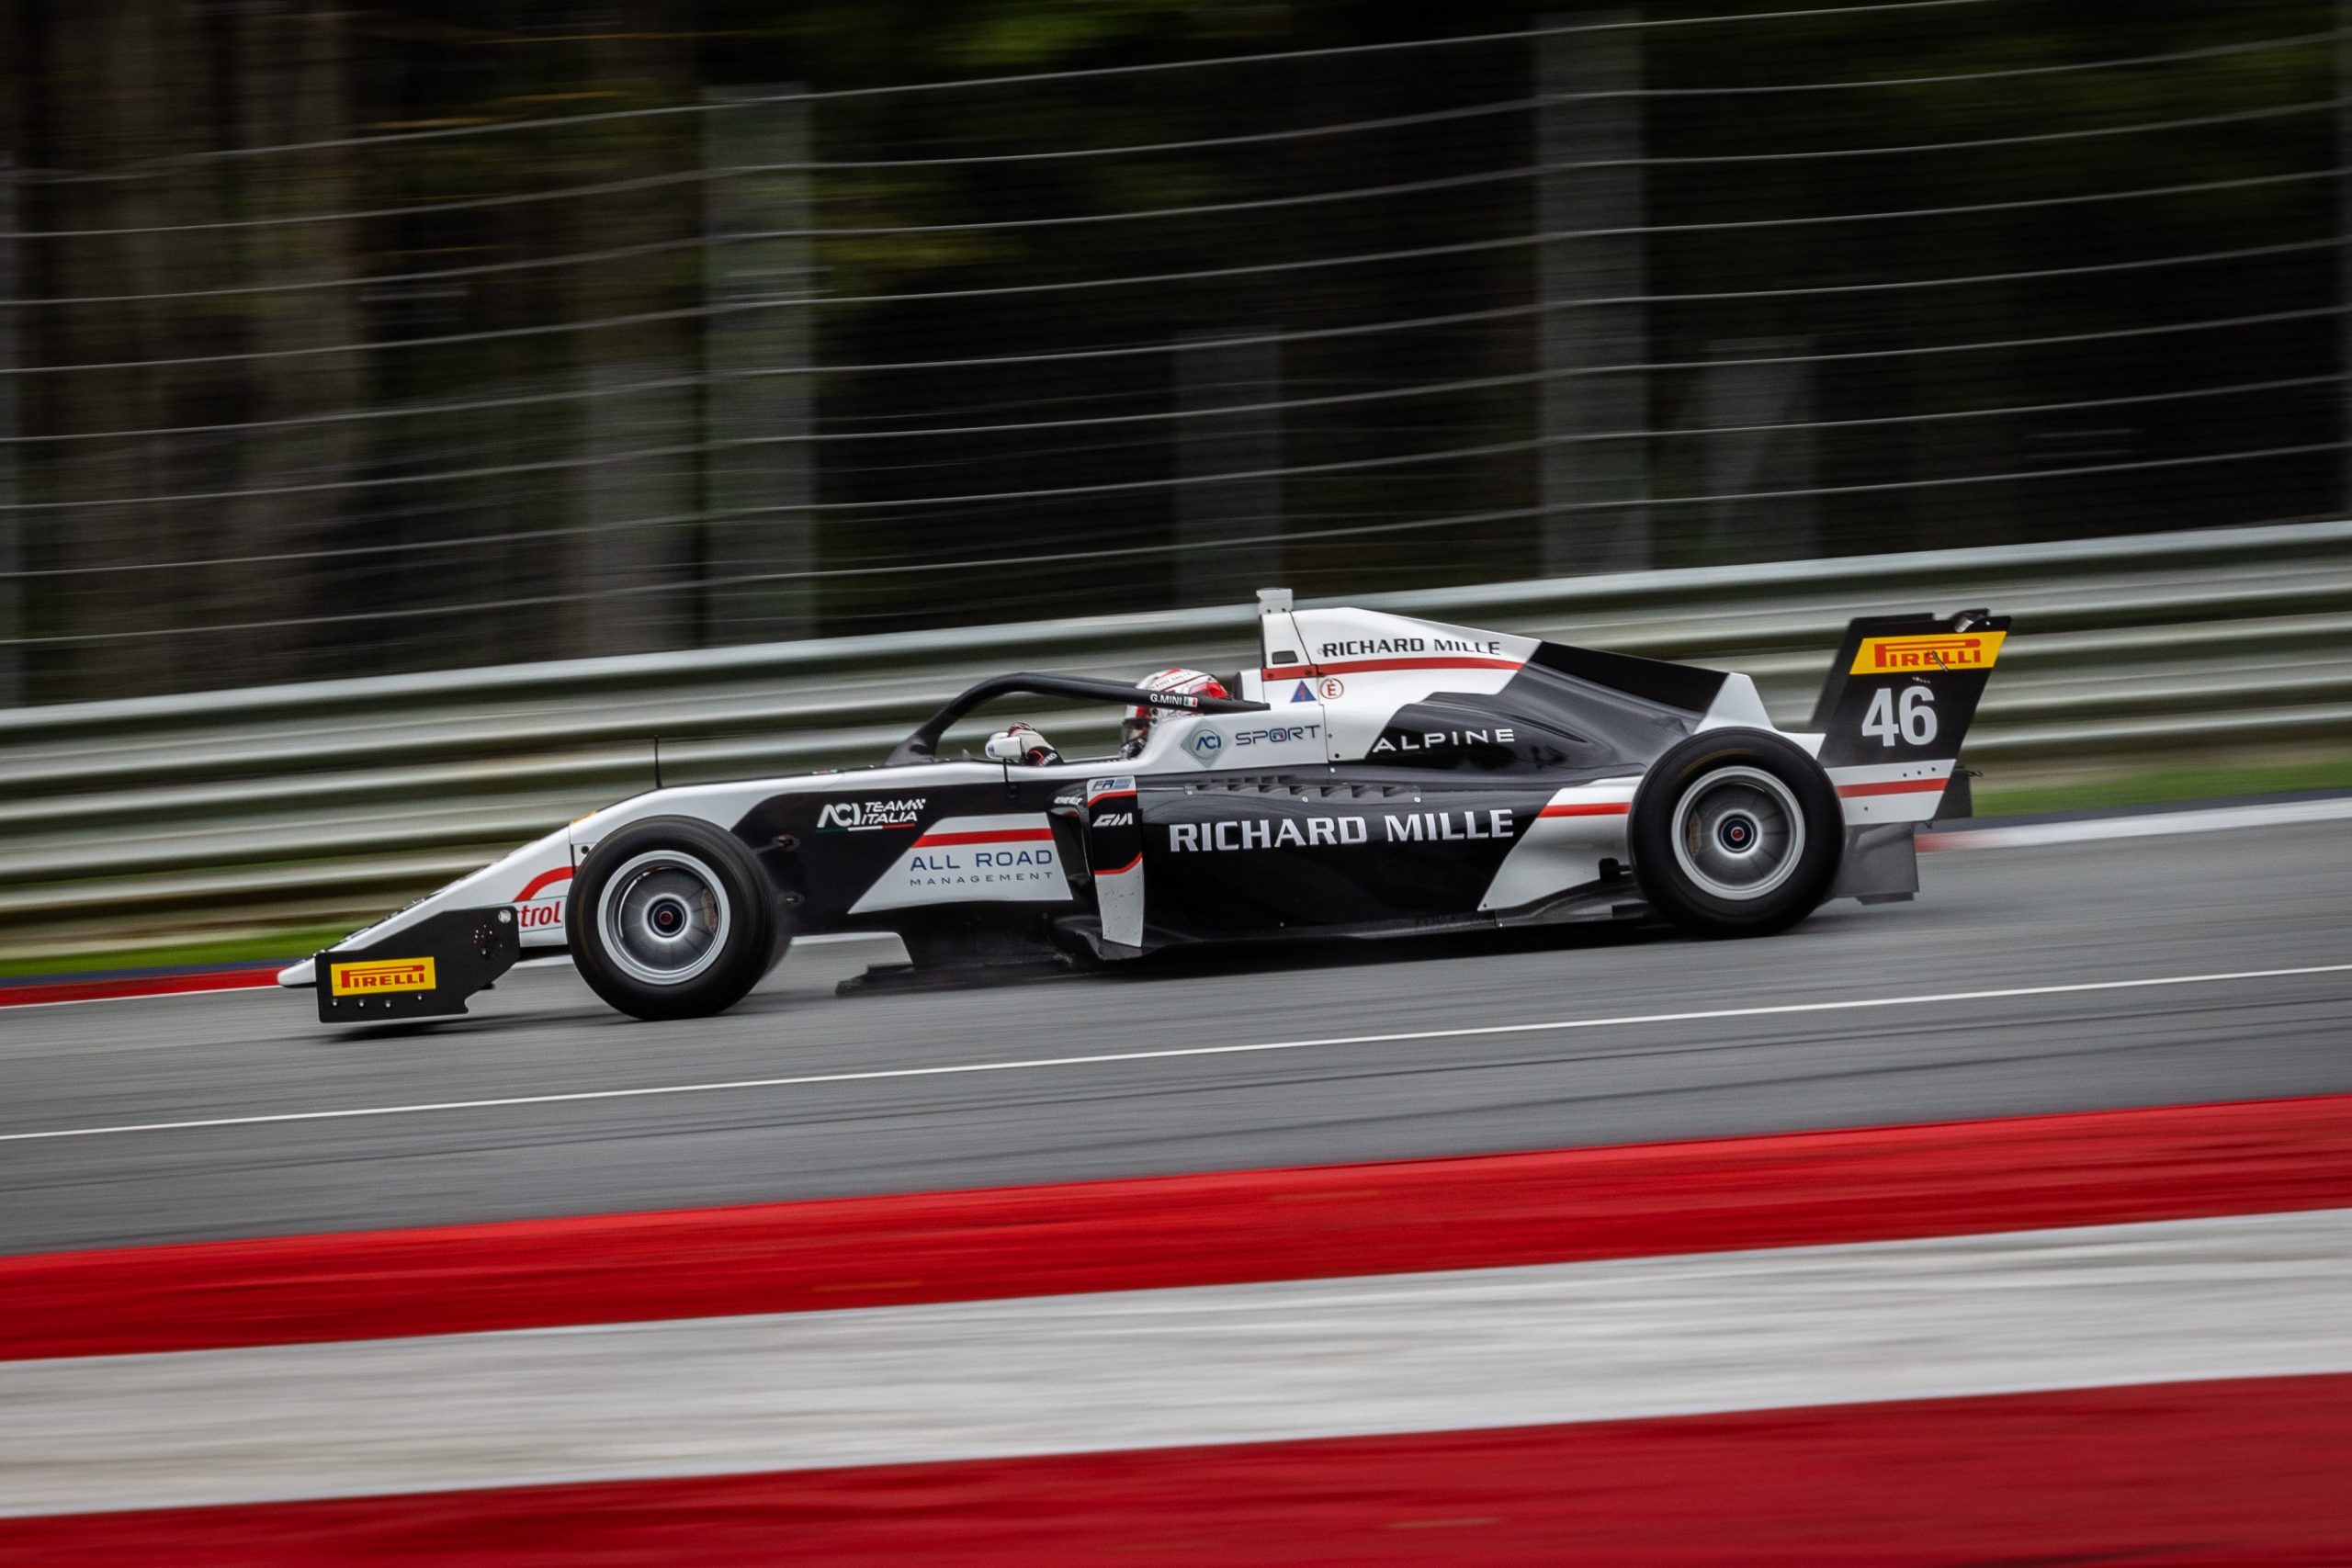 Point finishes at Red Bull Ring